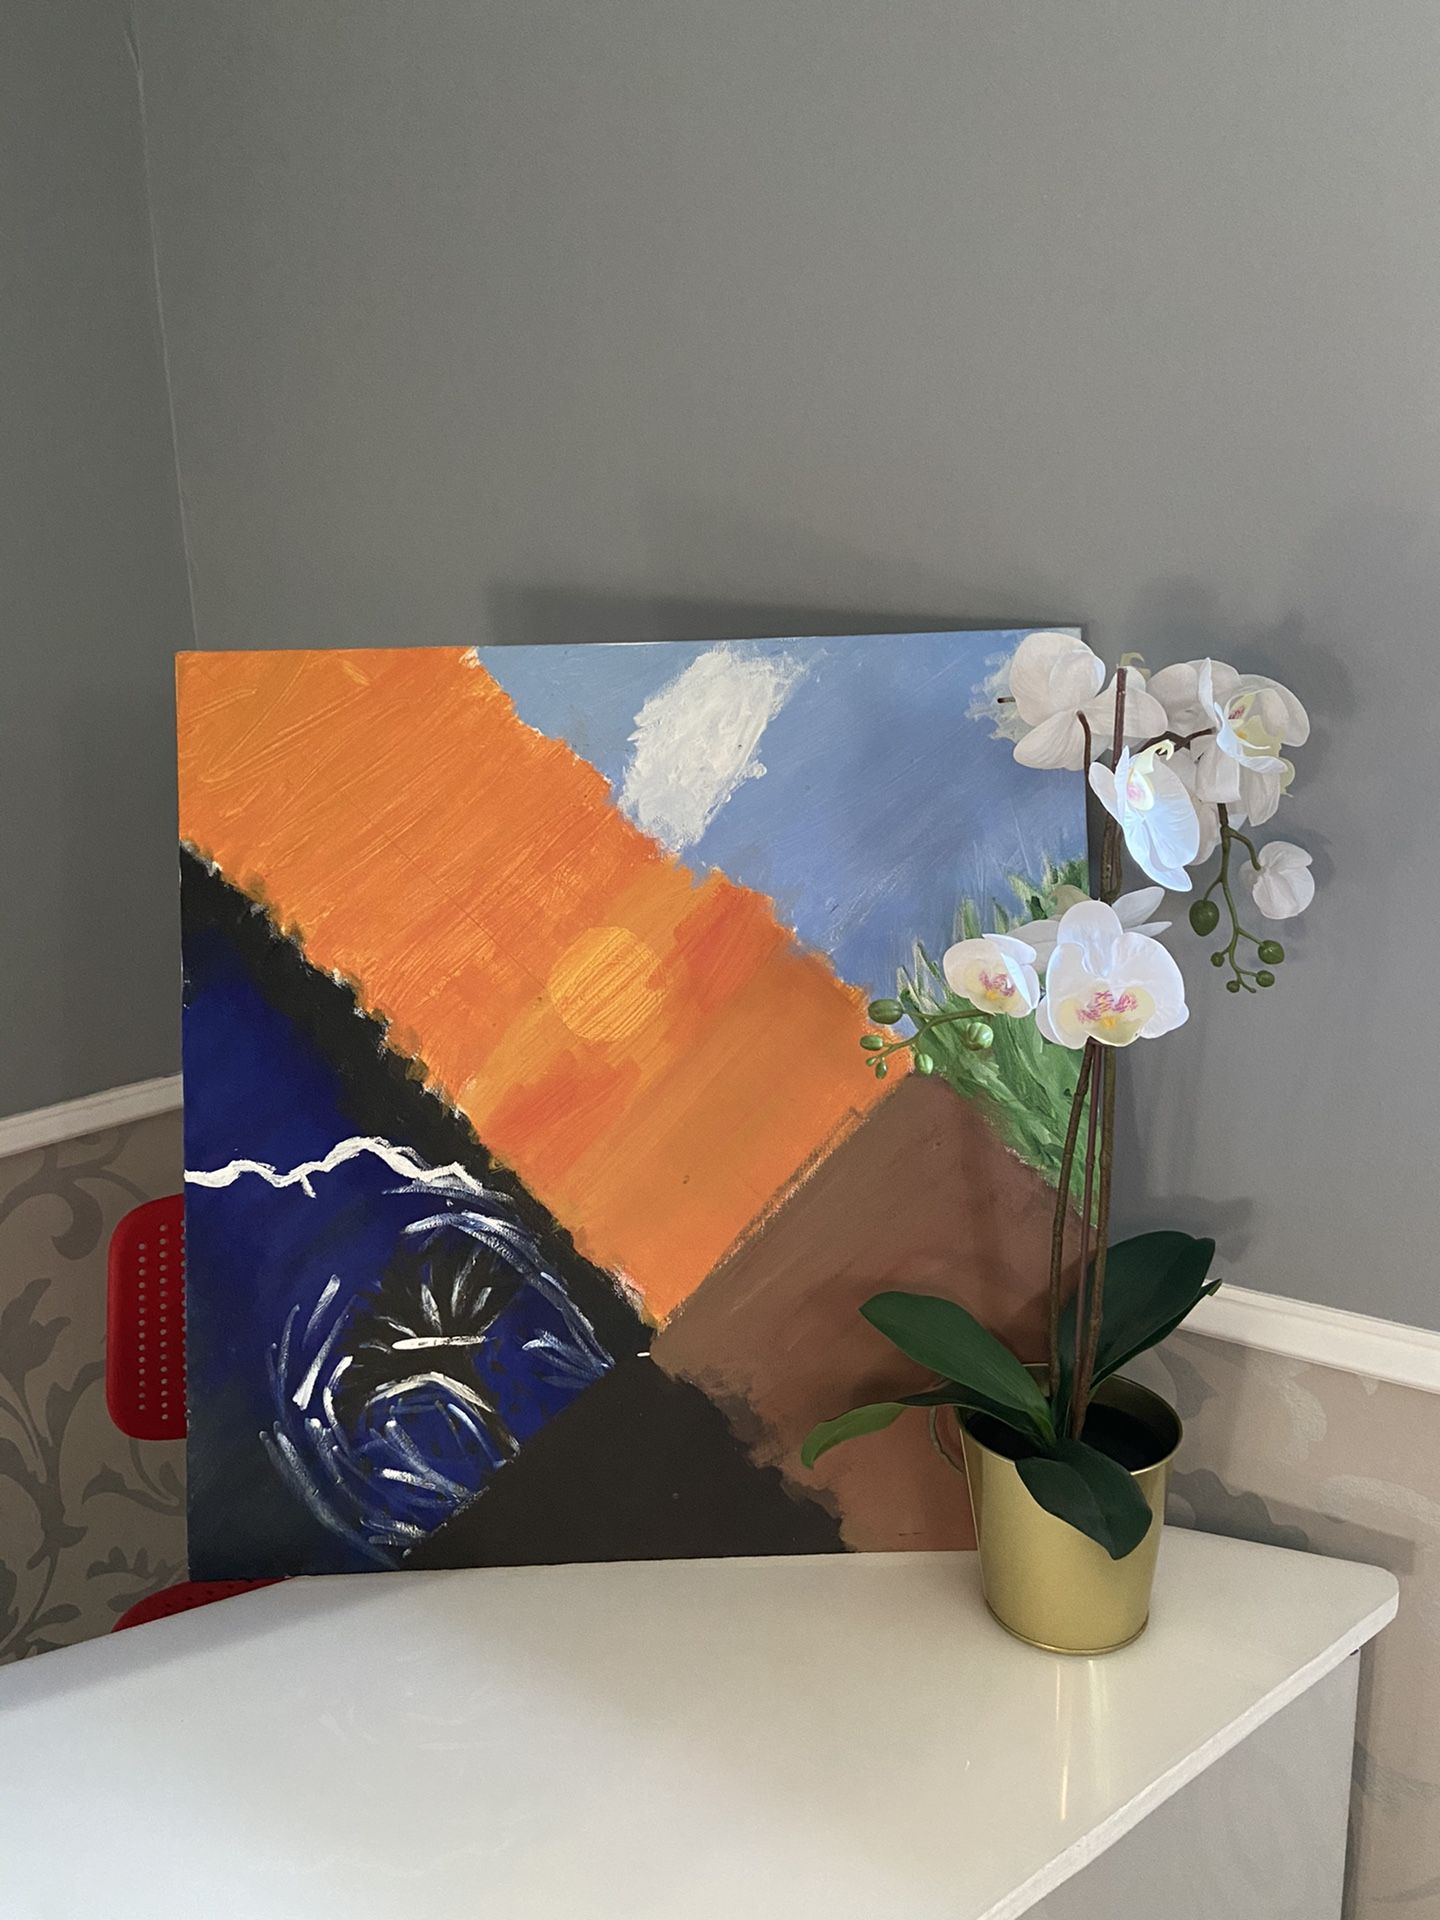 Hand-made painting